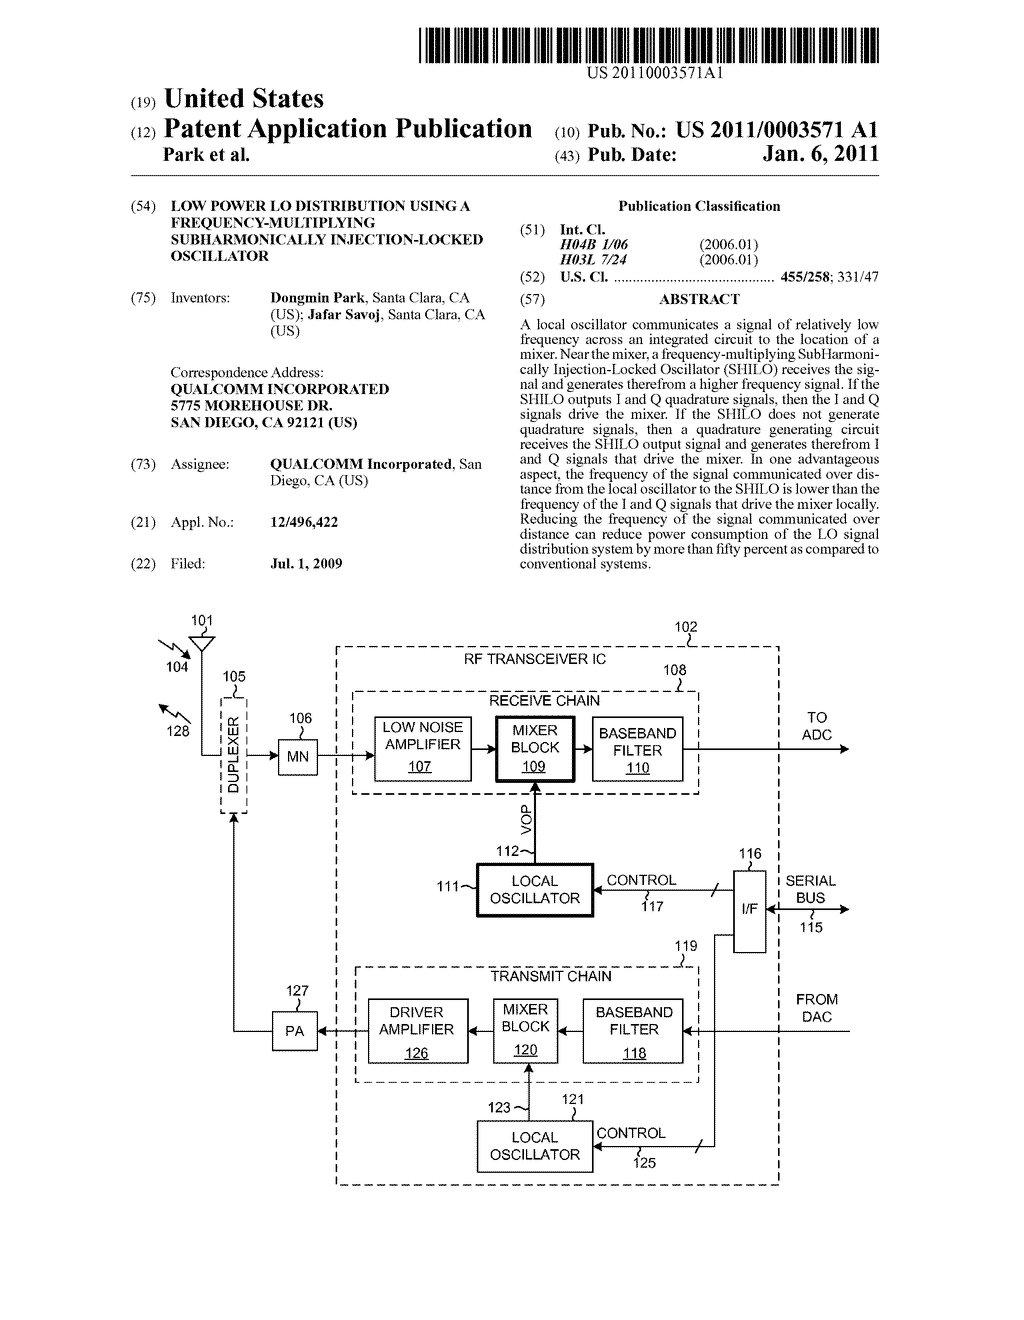 LOW POWER LO DISTRIBUTION USING A FREQUENCY-MULTIPLYING SUBHARMONICALLY INJECTION-LOCKED OSCILLATOR - diagram, schematic, and image 01